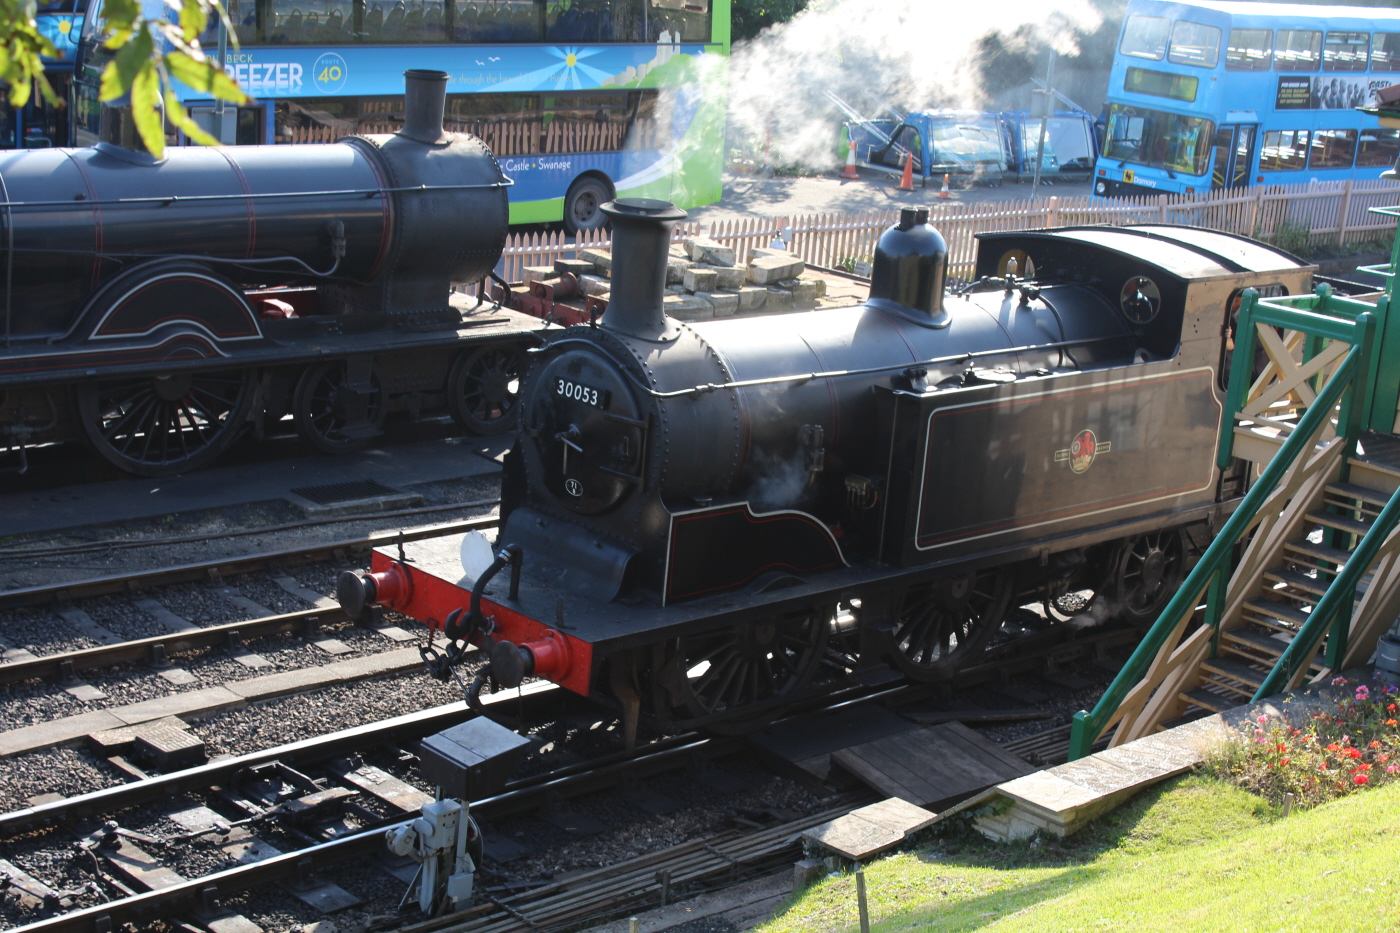 Two Drummond's at Swanage; the M7 and T9 30120